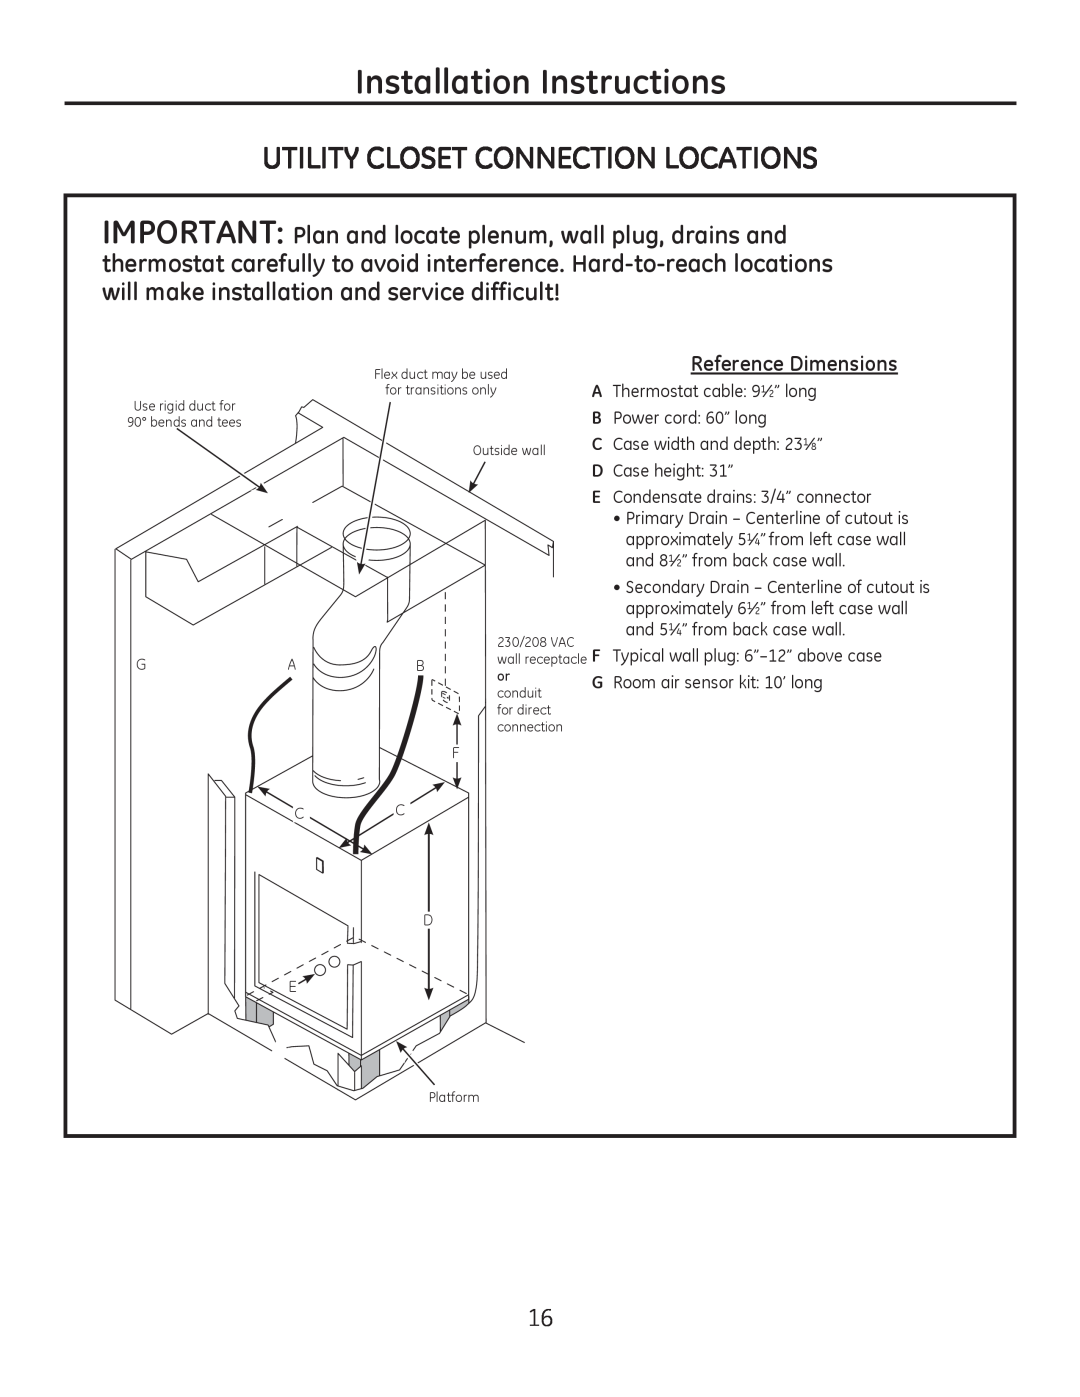 GE 8500 Series Utility Closet Connection Locations, Reference Dimensions, Installation Instructions 